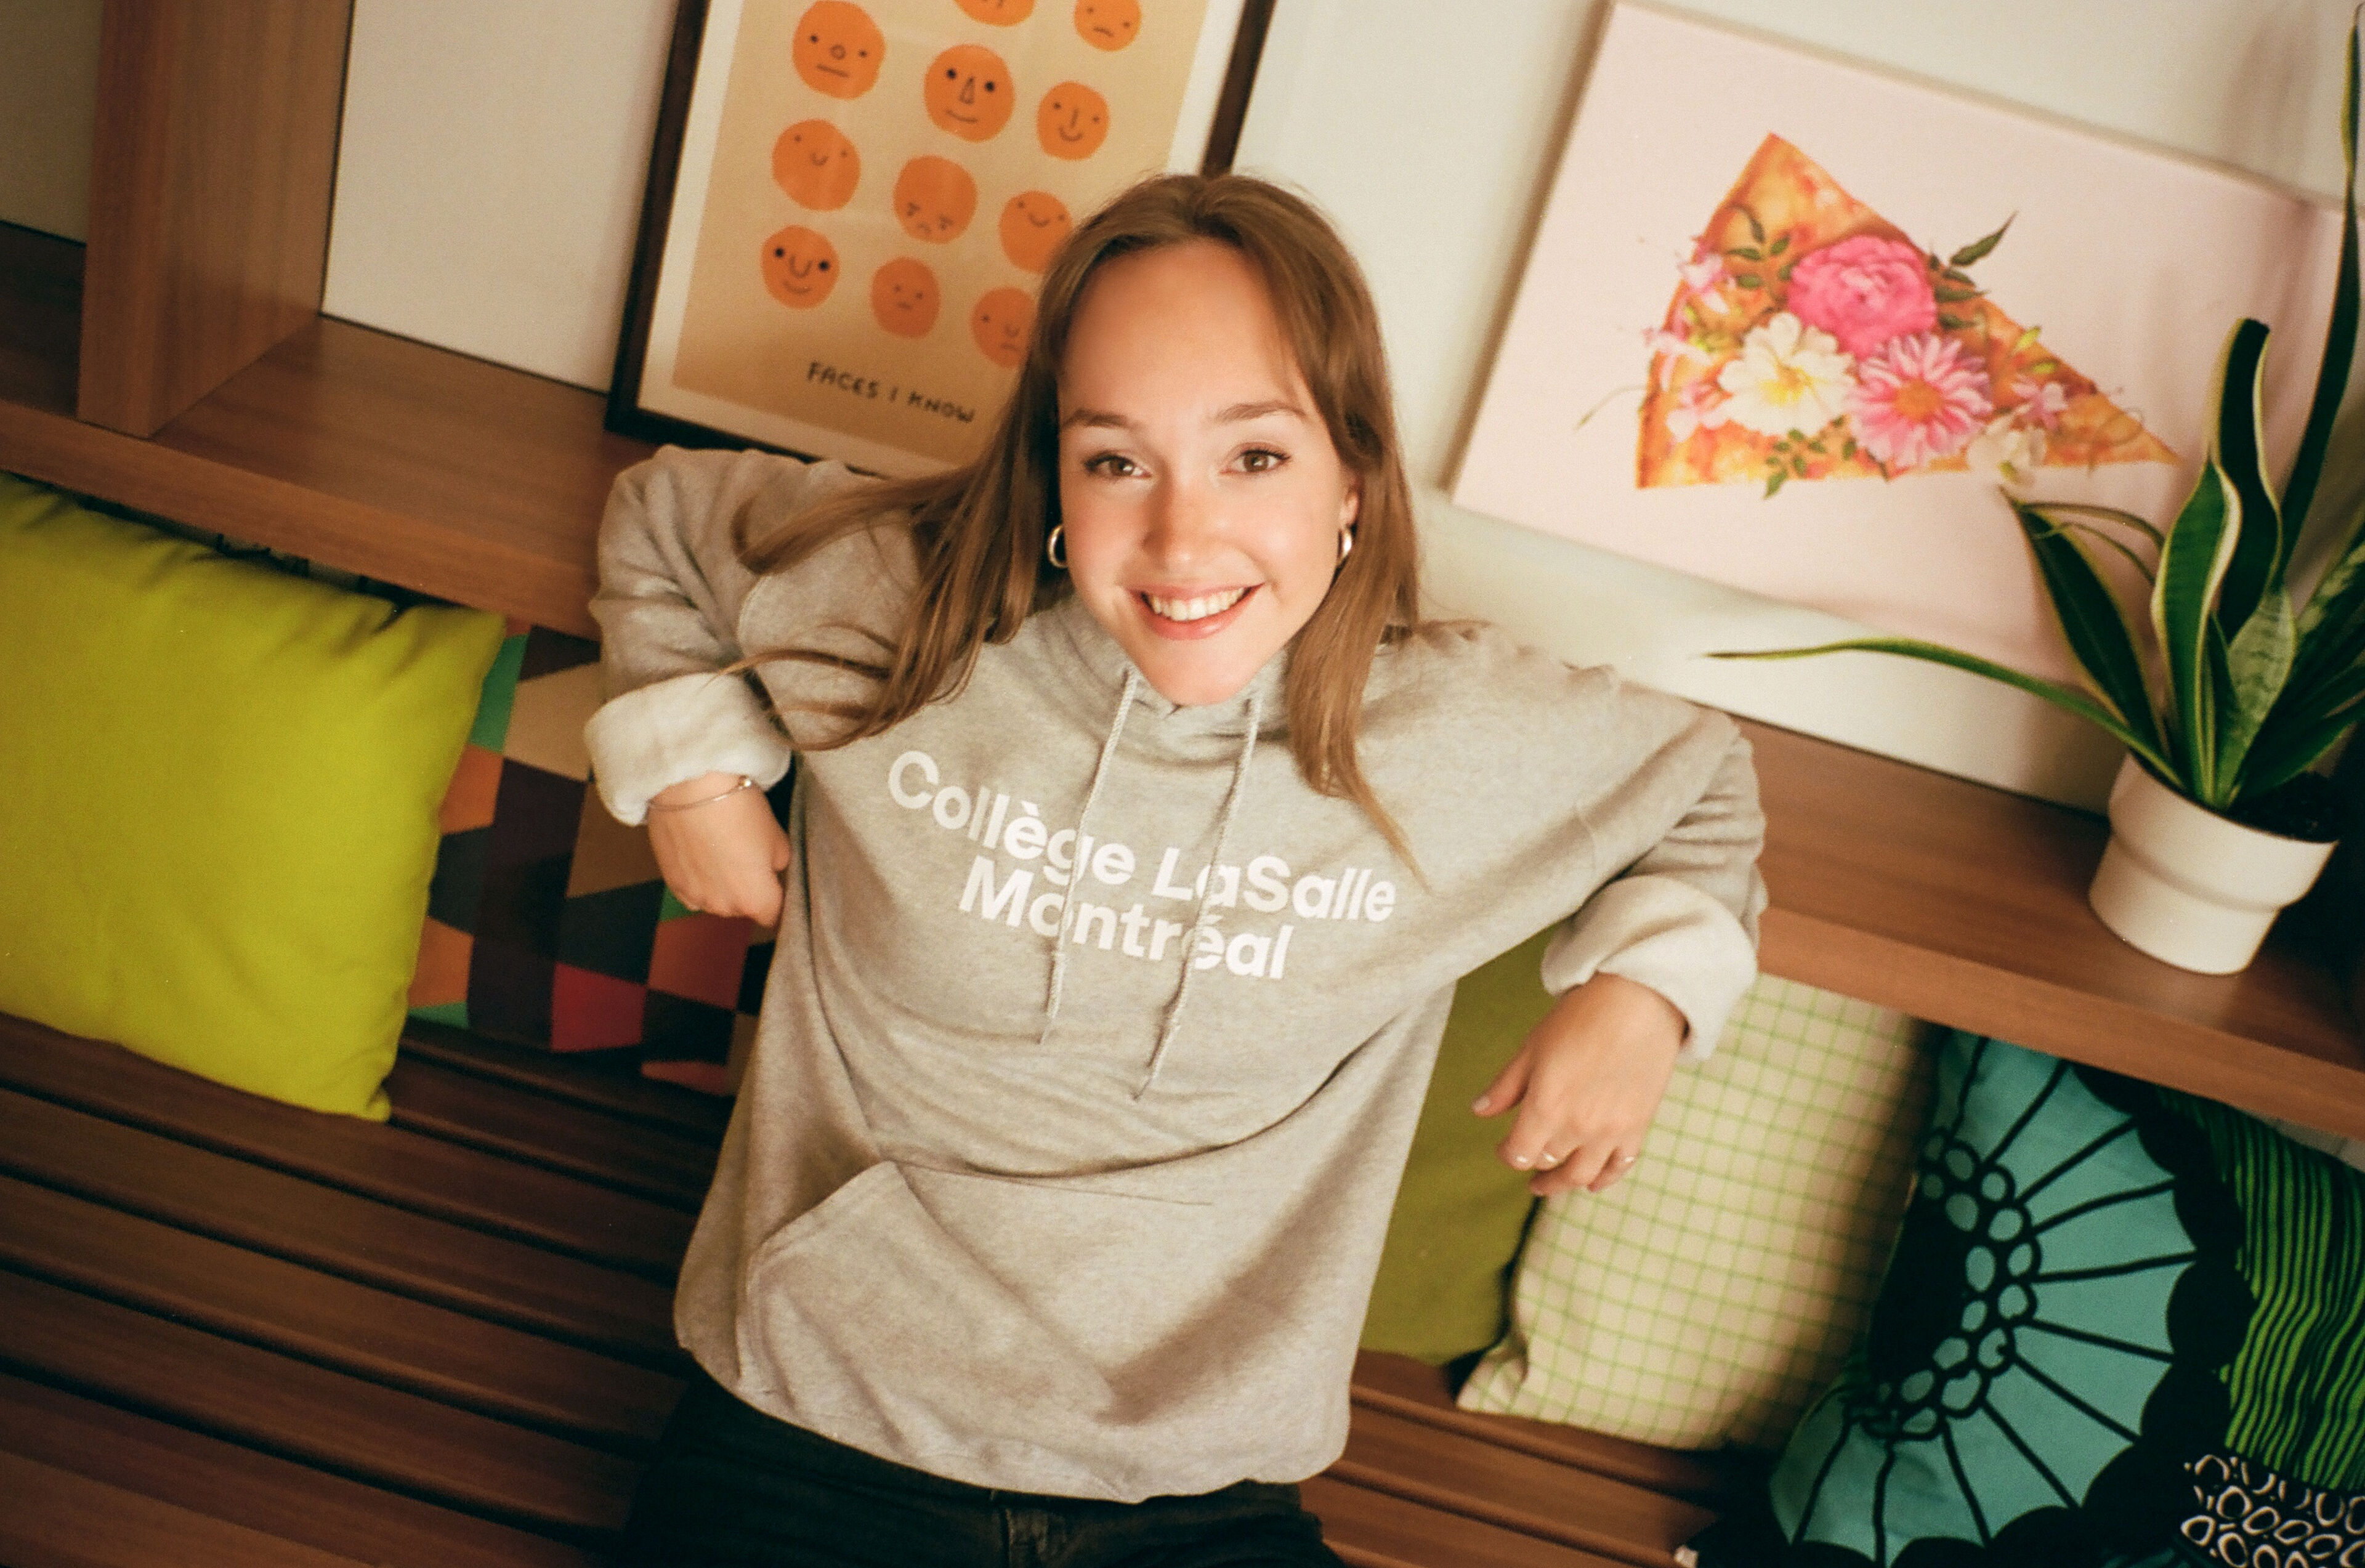 A cheerful student showcases her college pride in a cozy branded sweatshirt.